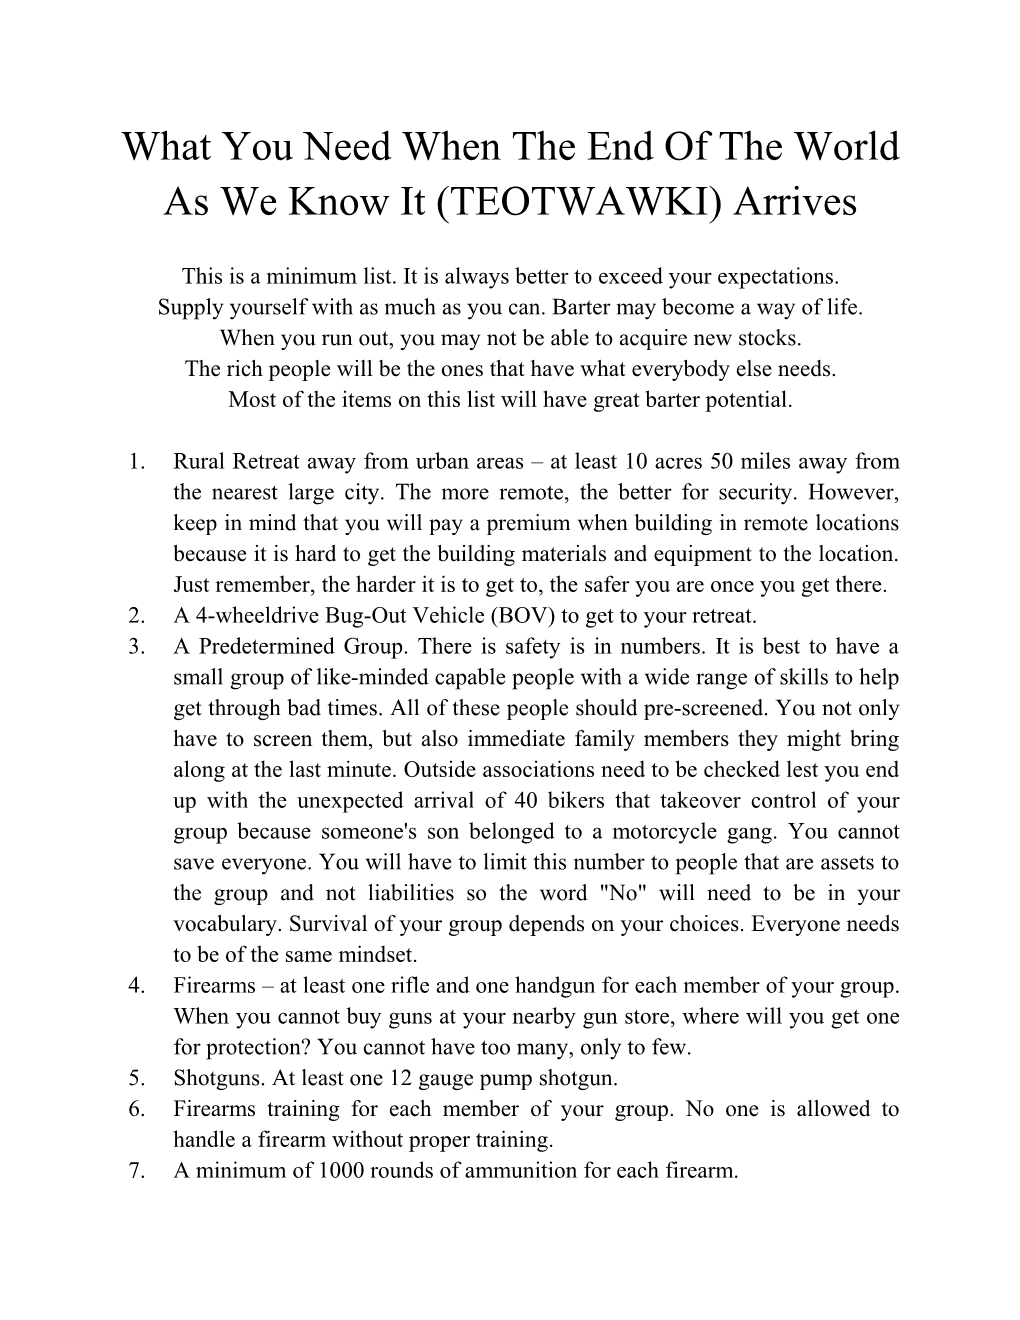 What You Need When the End of the World As We Know It (TEOTWAWKI) Arrives